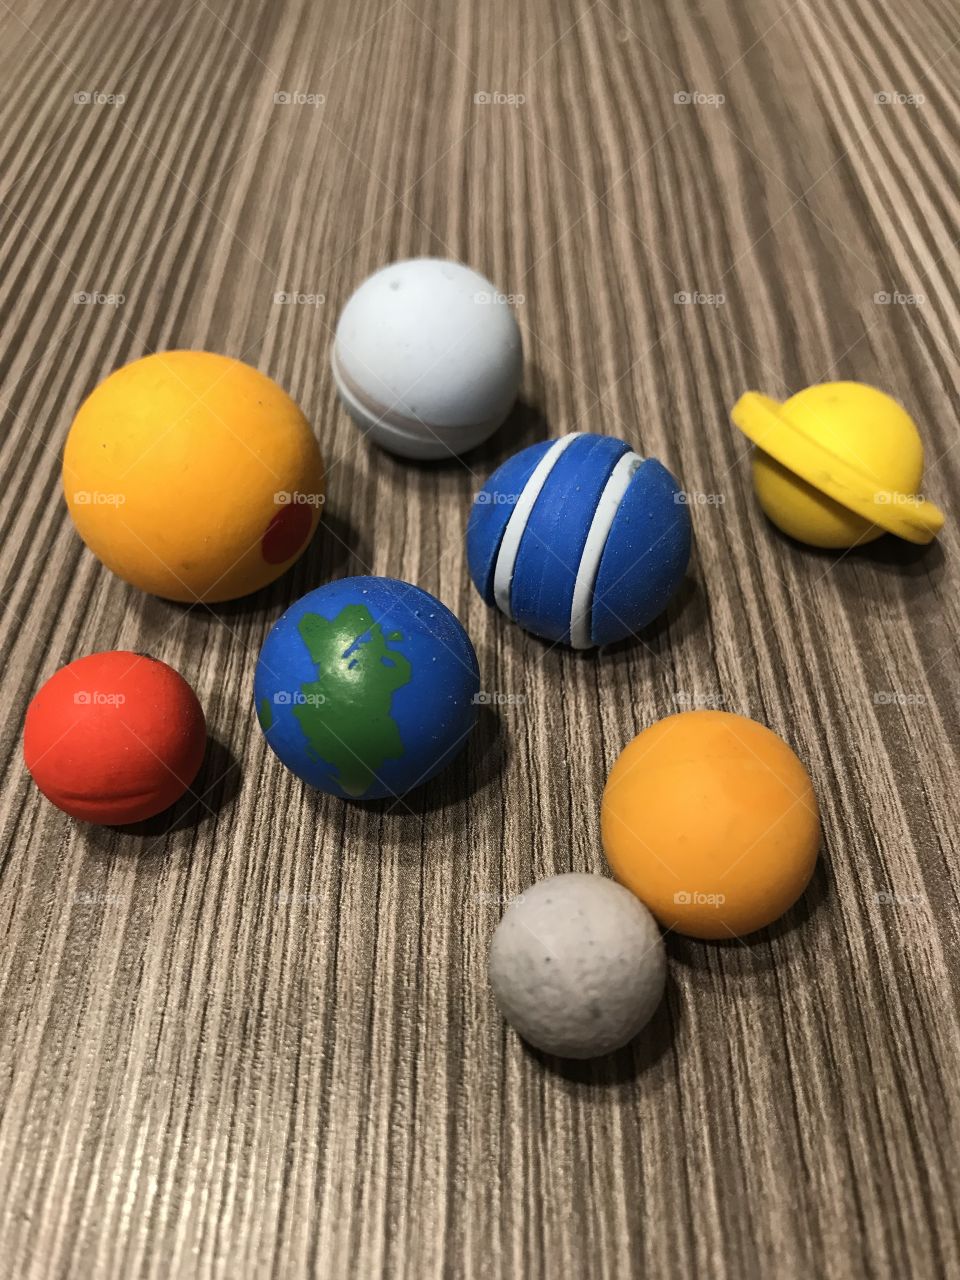 Planets rubber